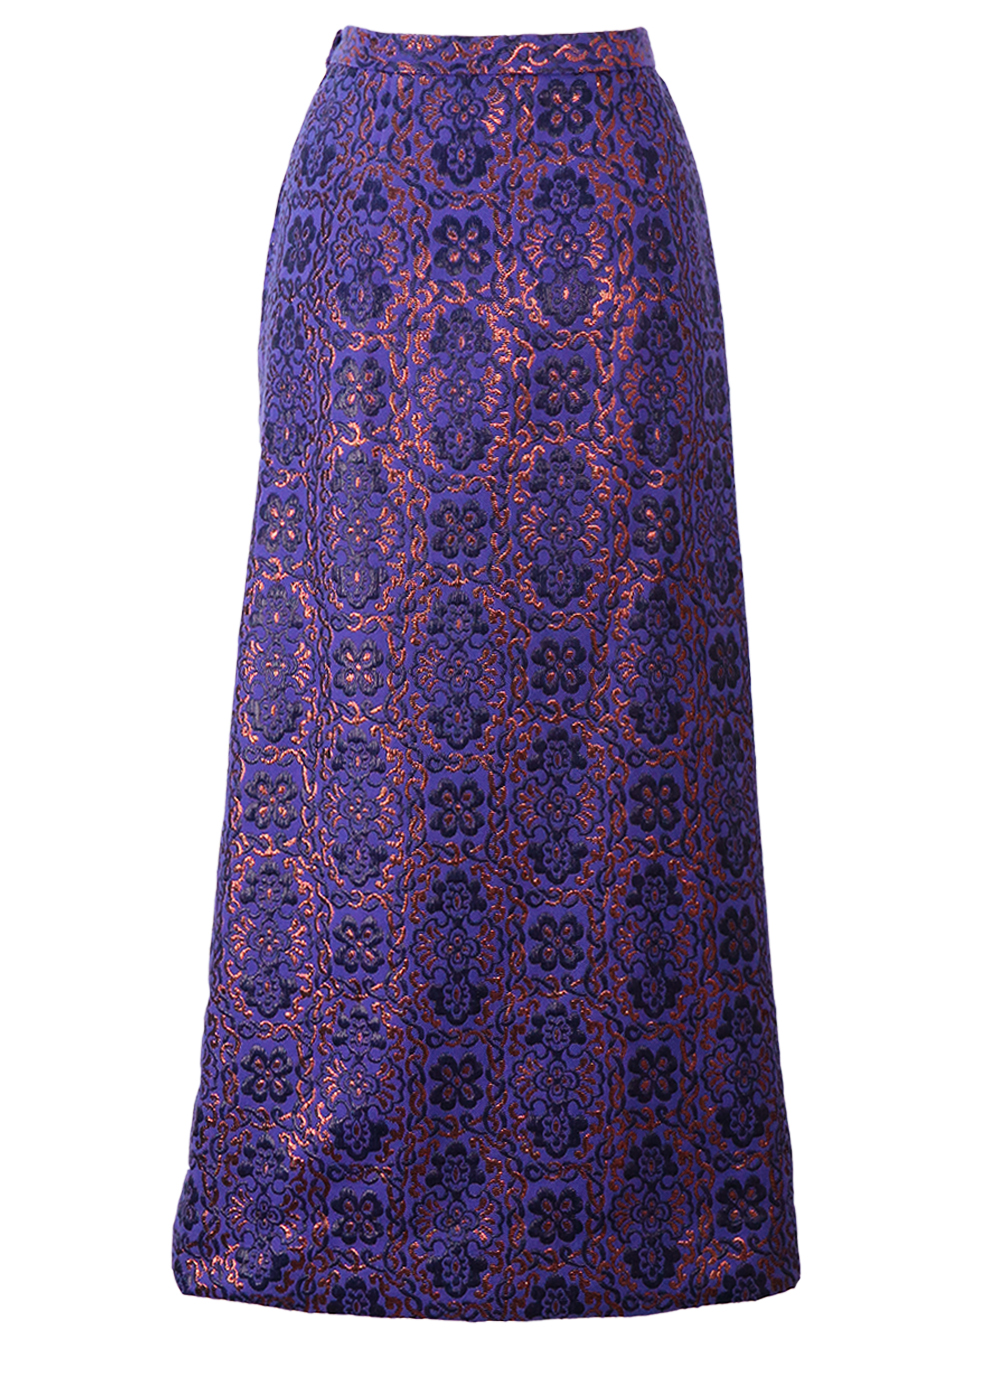 Vintage 60's Purple Tyrolean Maxi Skirt with Metallic Copper Floral ...